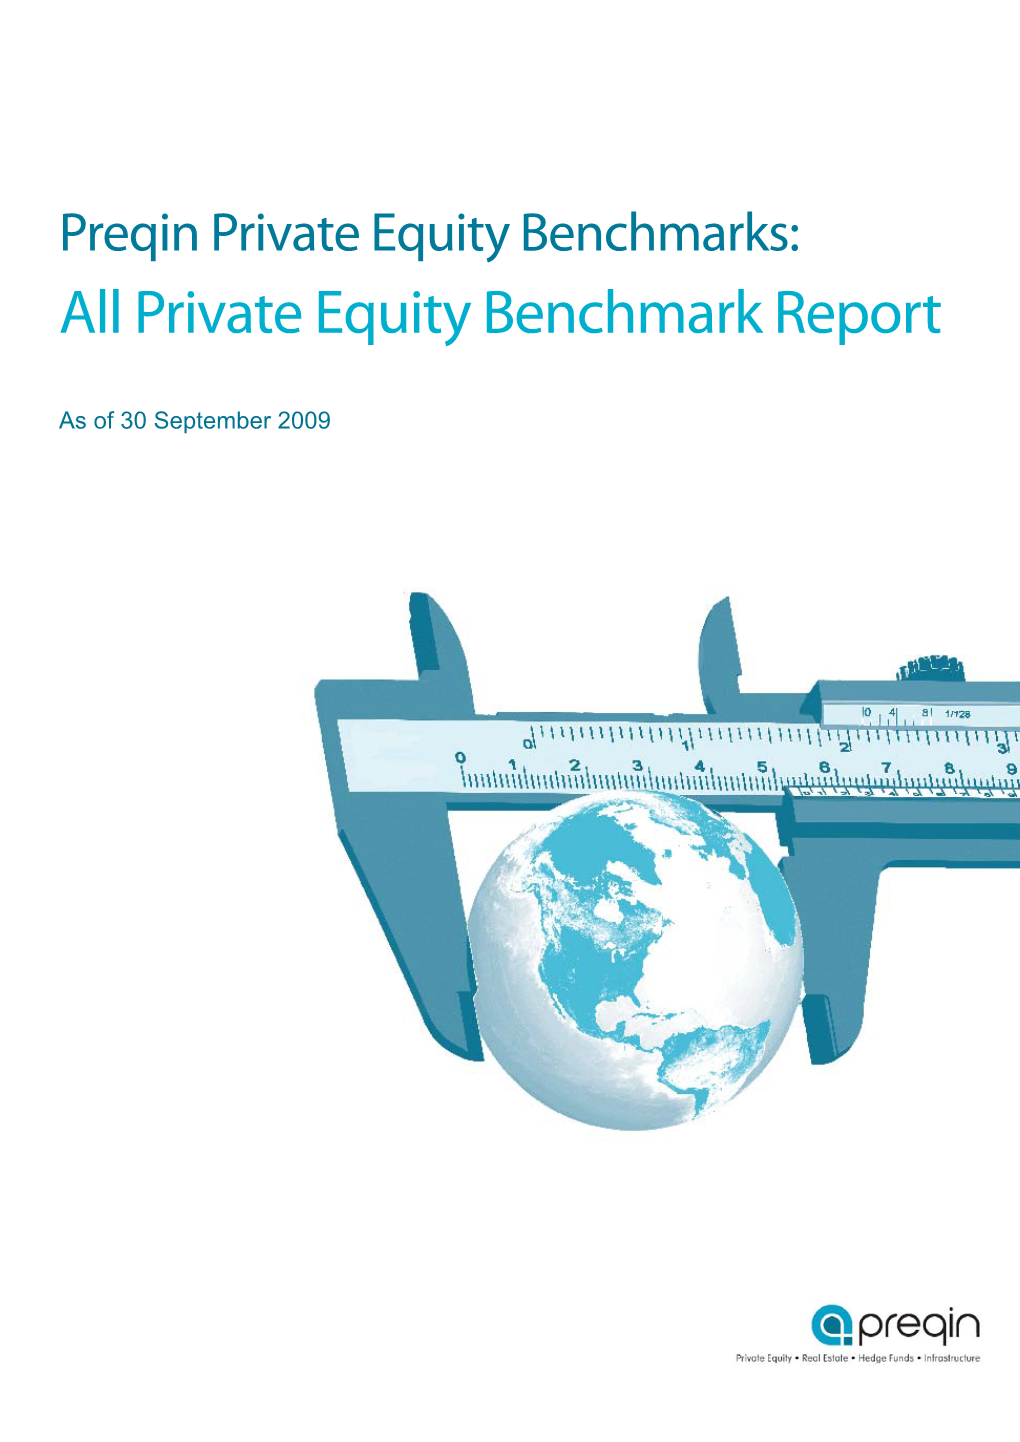 All Private Equity Benchmark Report